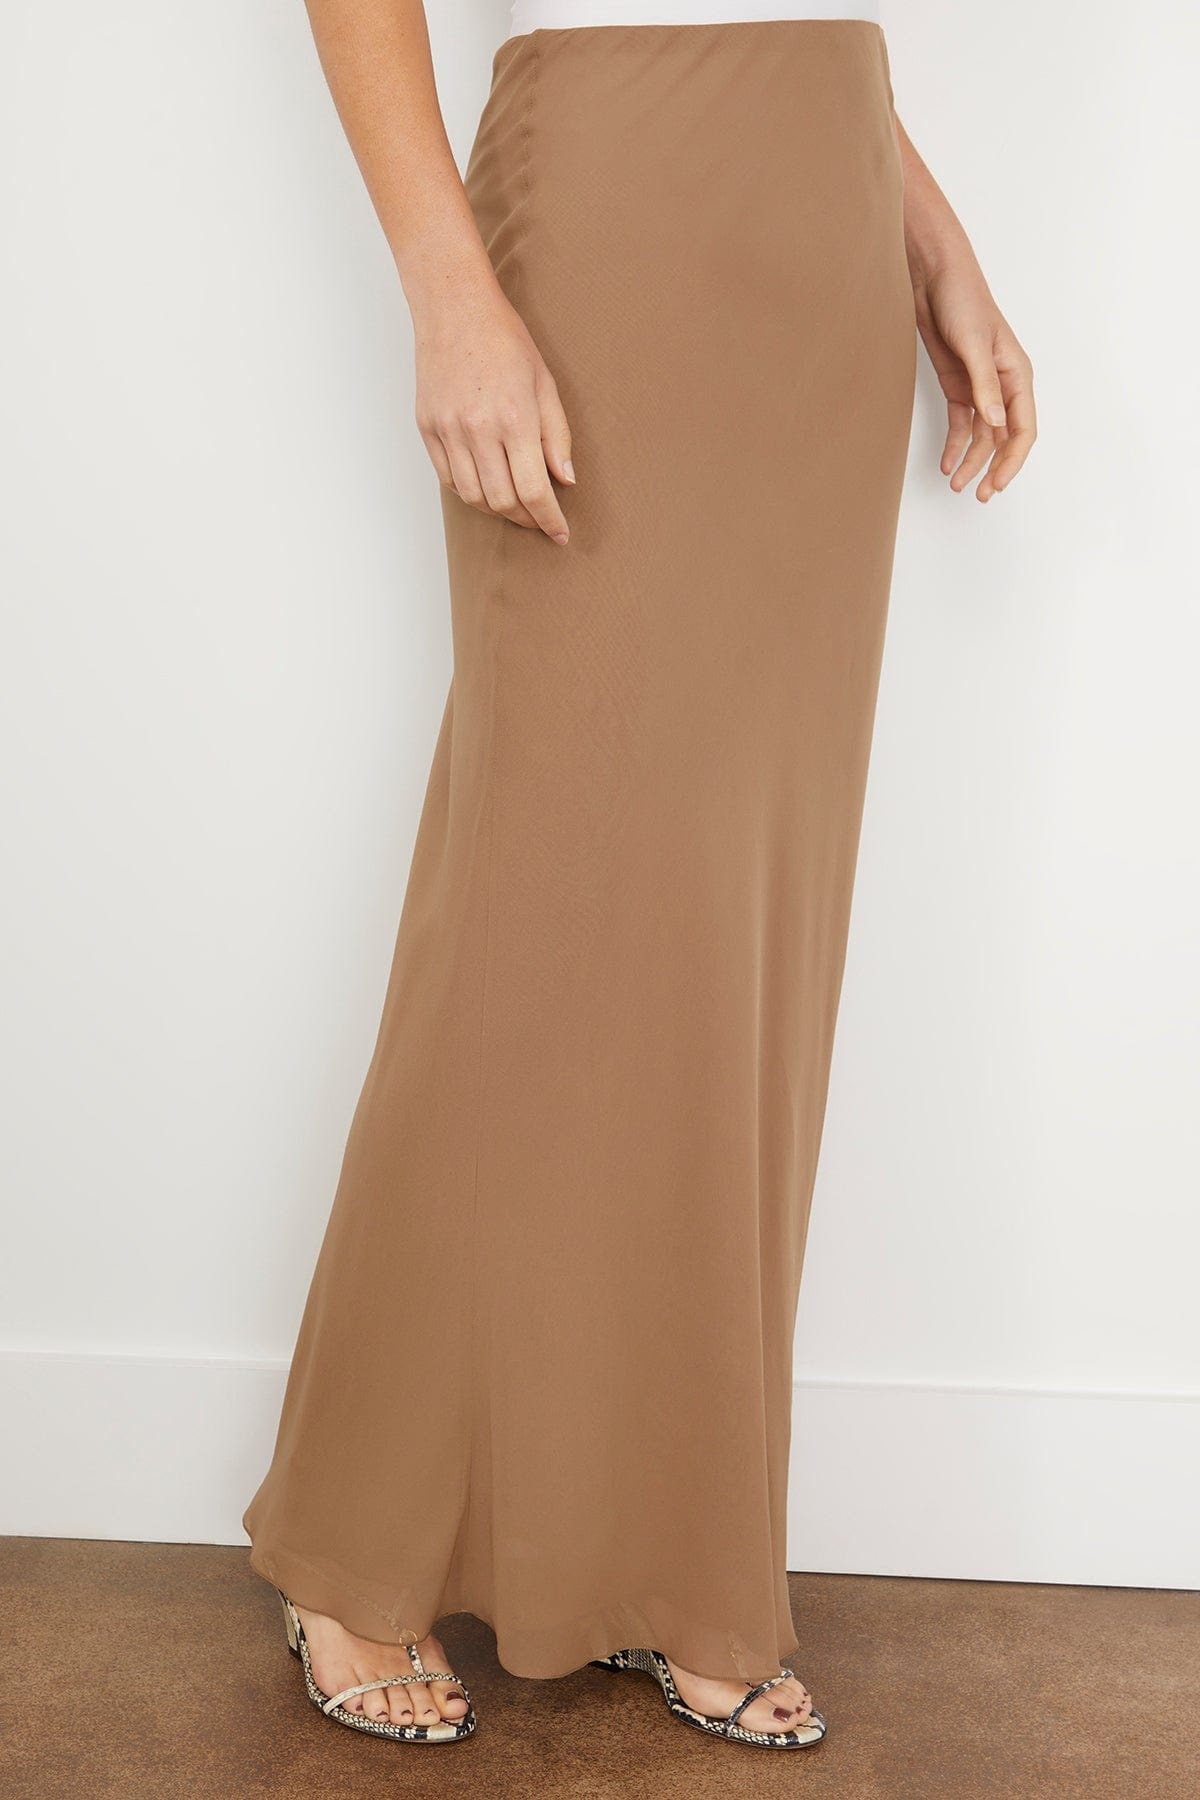 Mauva Skirt in Toffee - 3